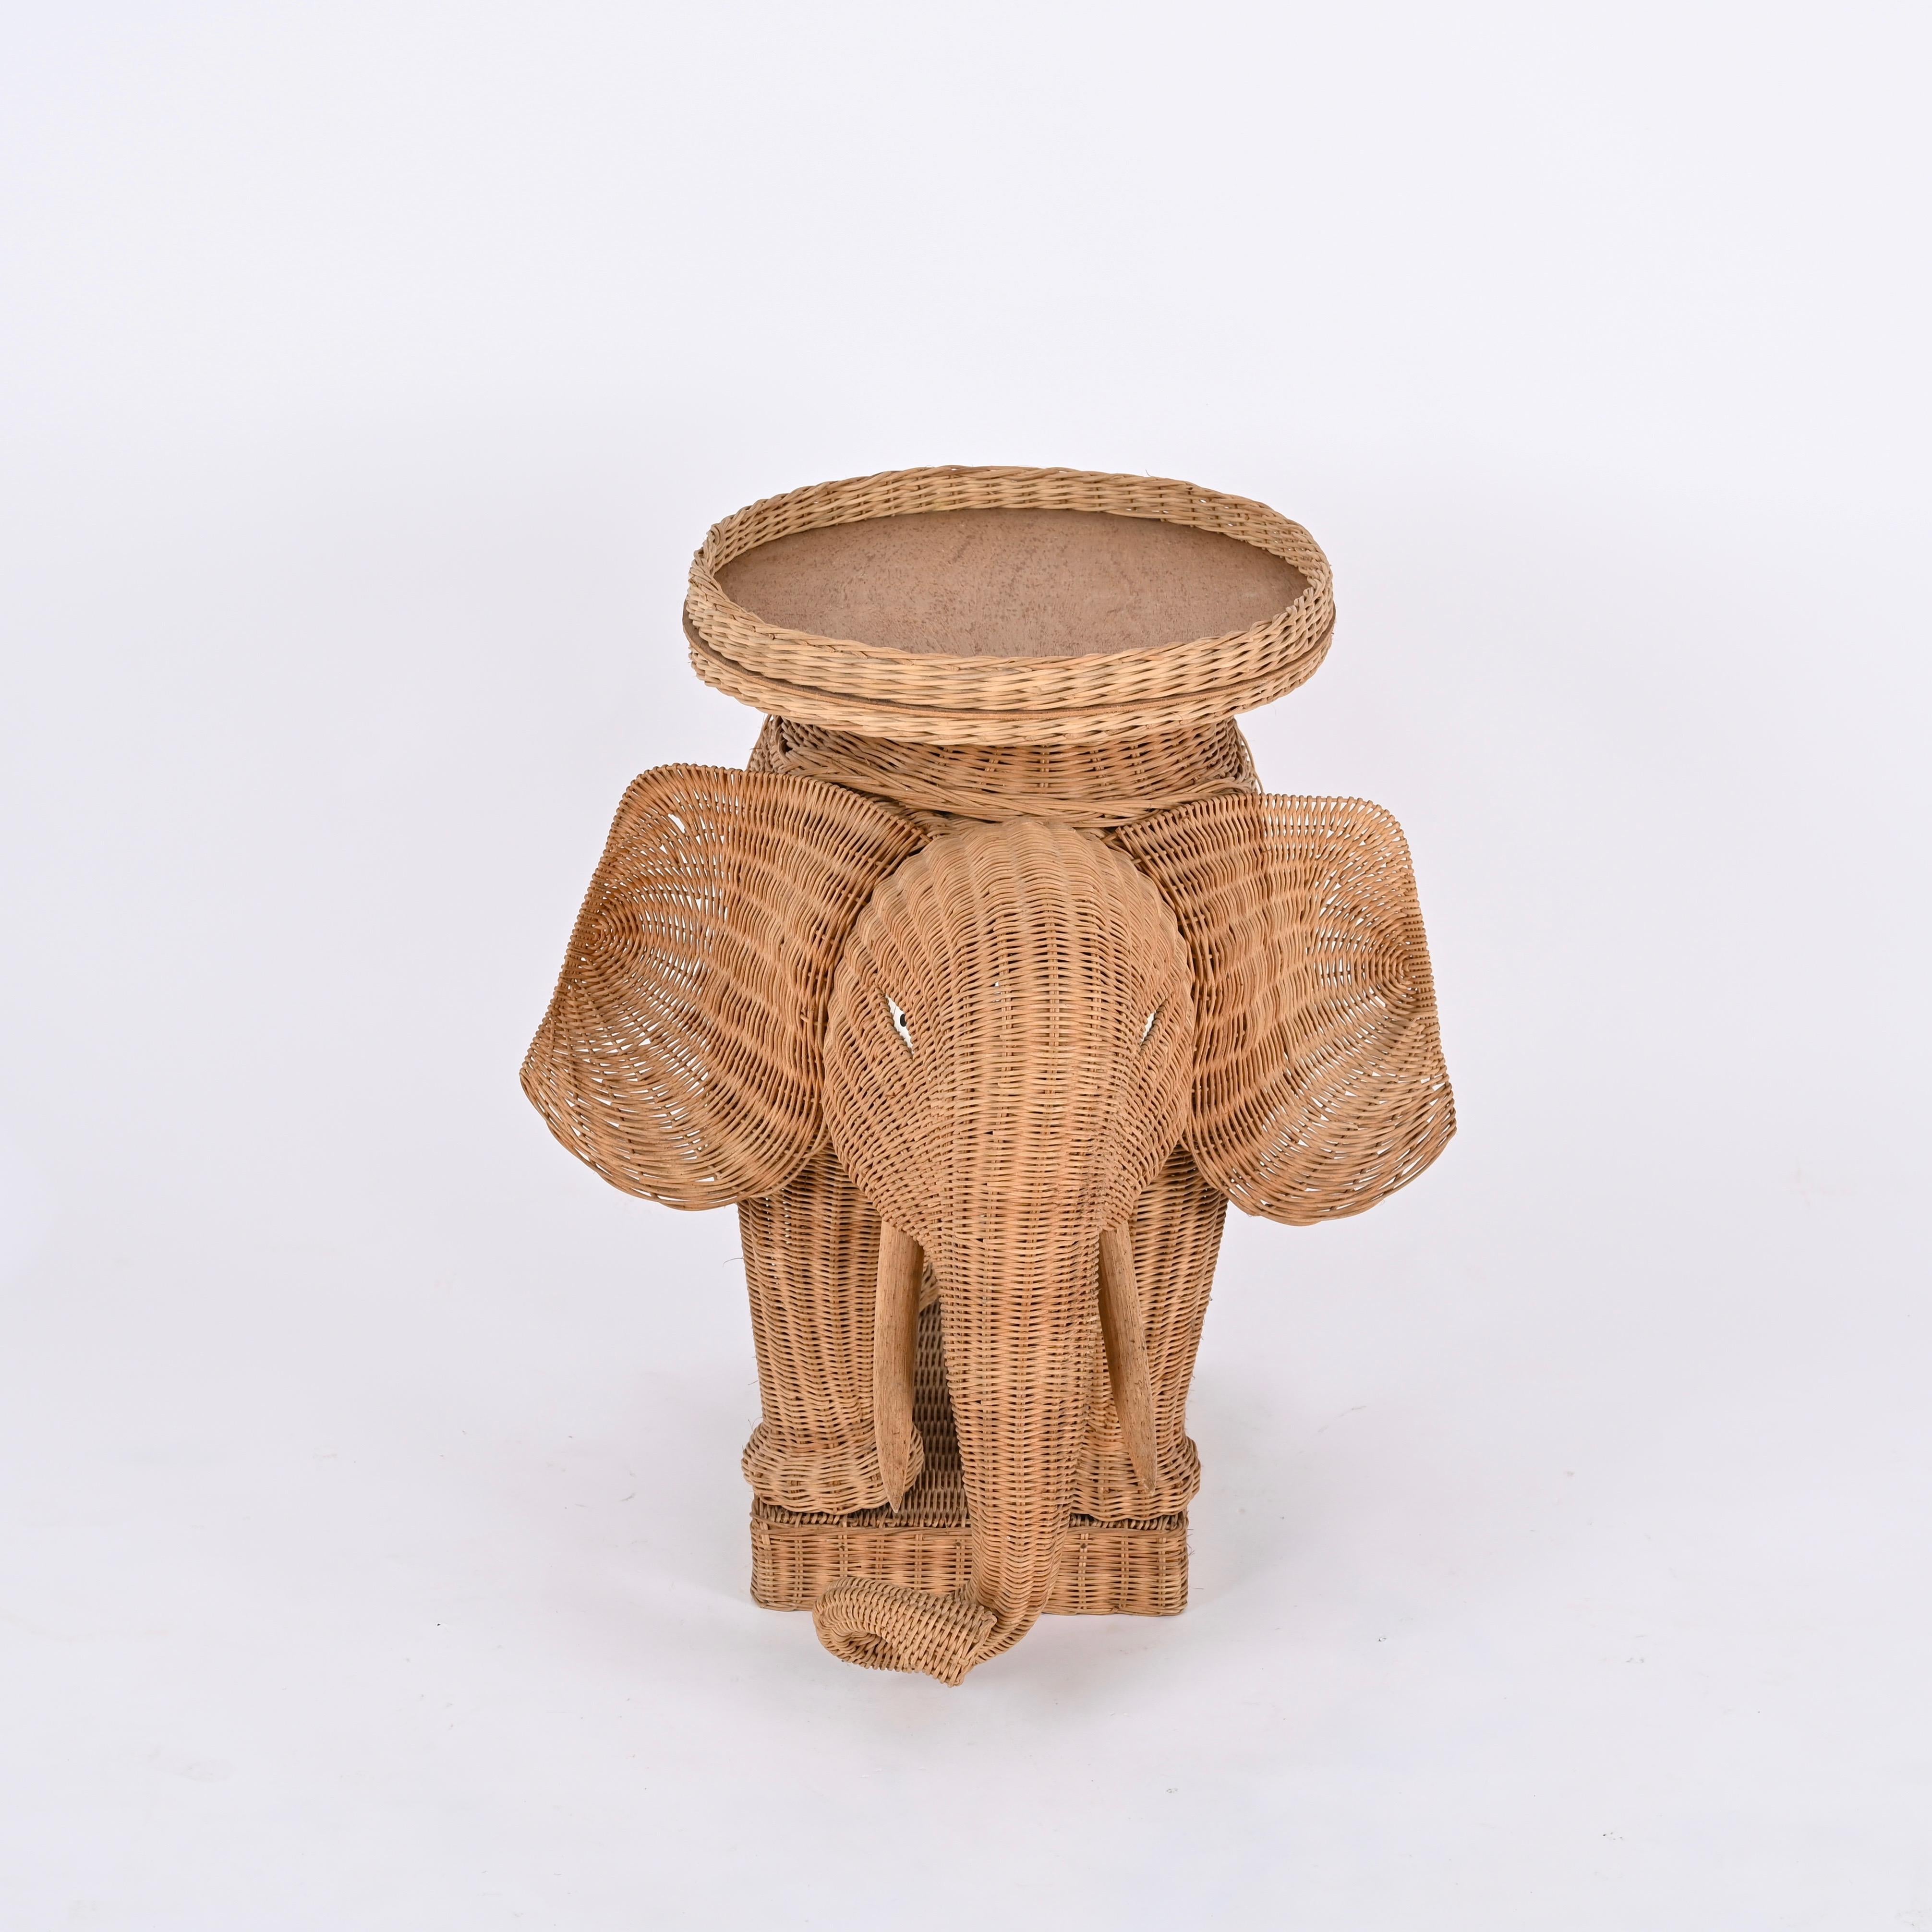 Bamboo Large Rattan and Wicker Elephant Side Table by Vivai del Sud, Italy 1970s